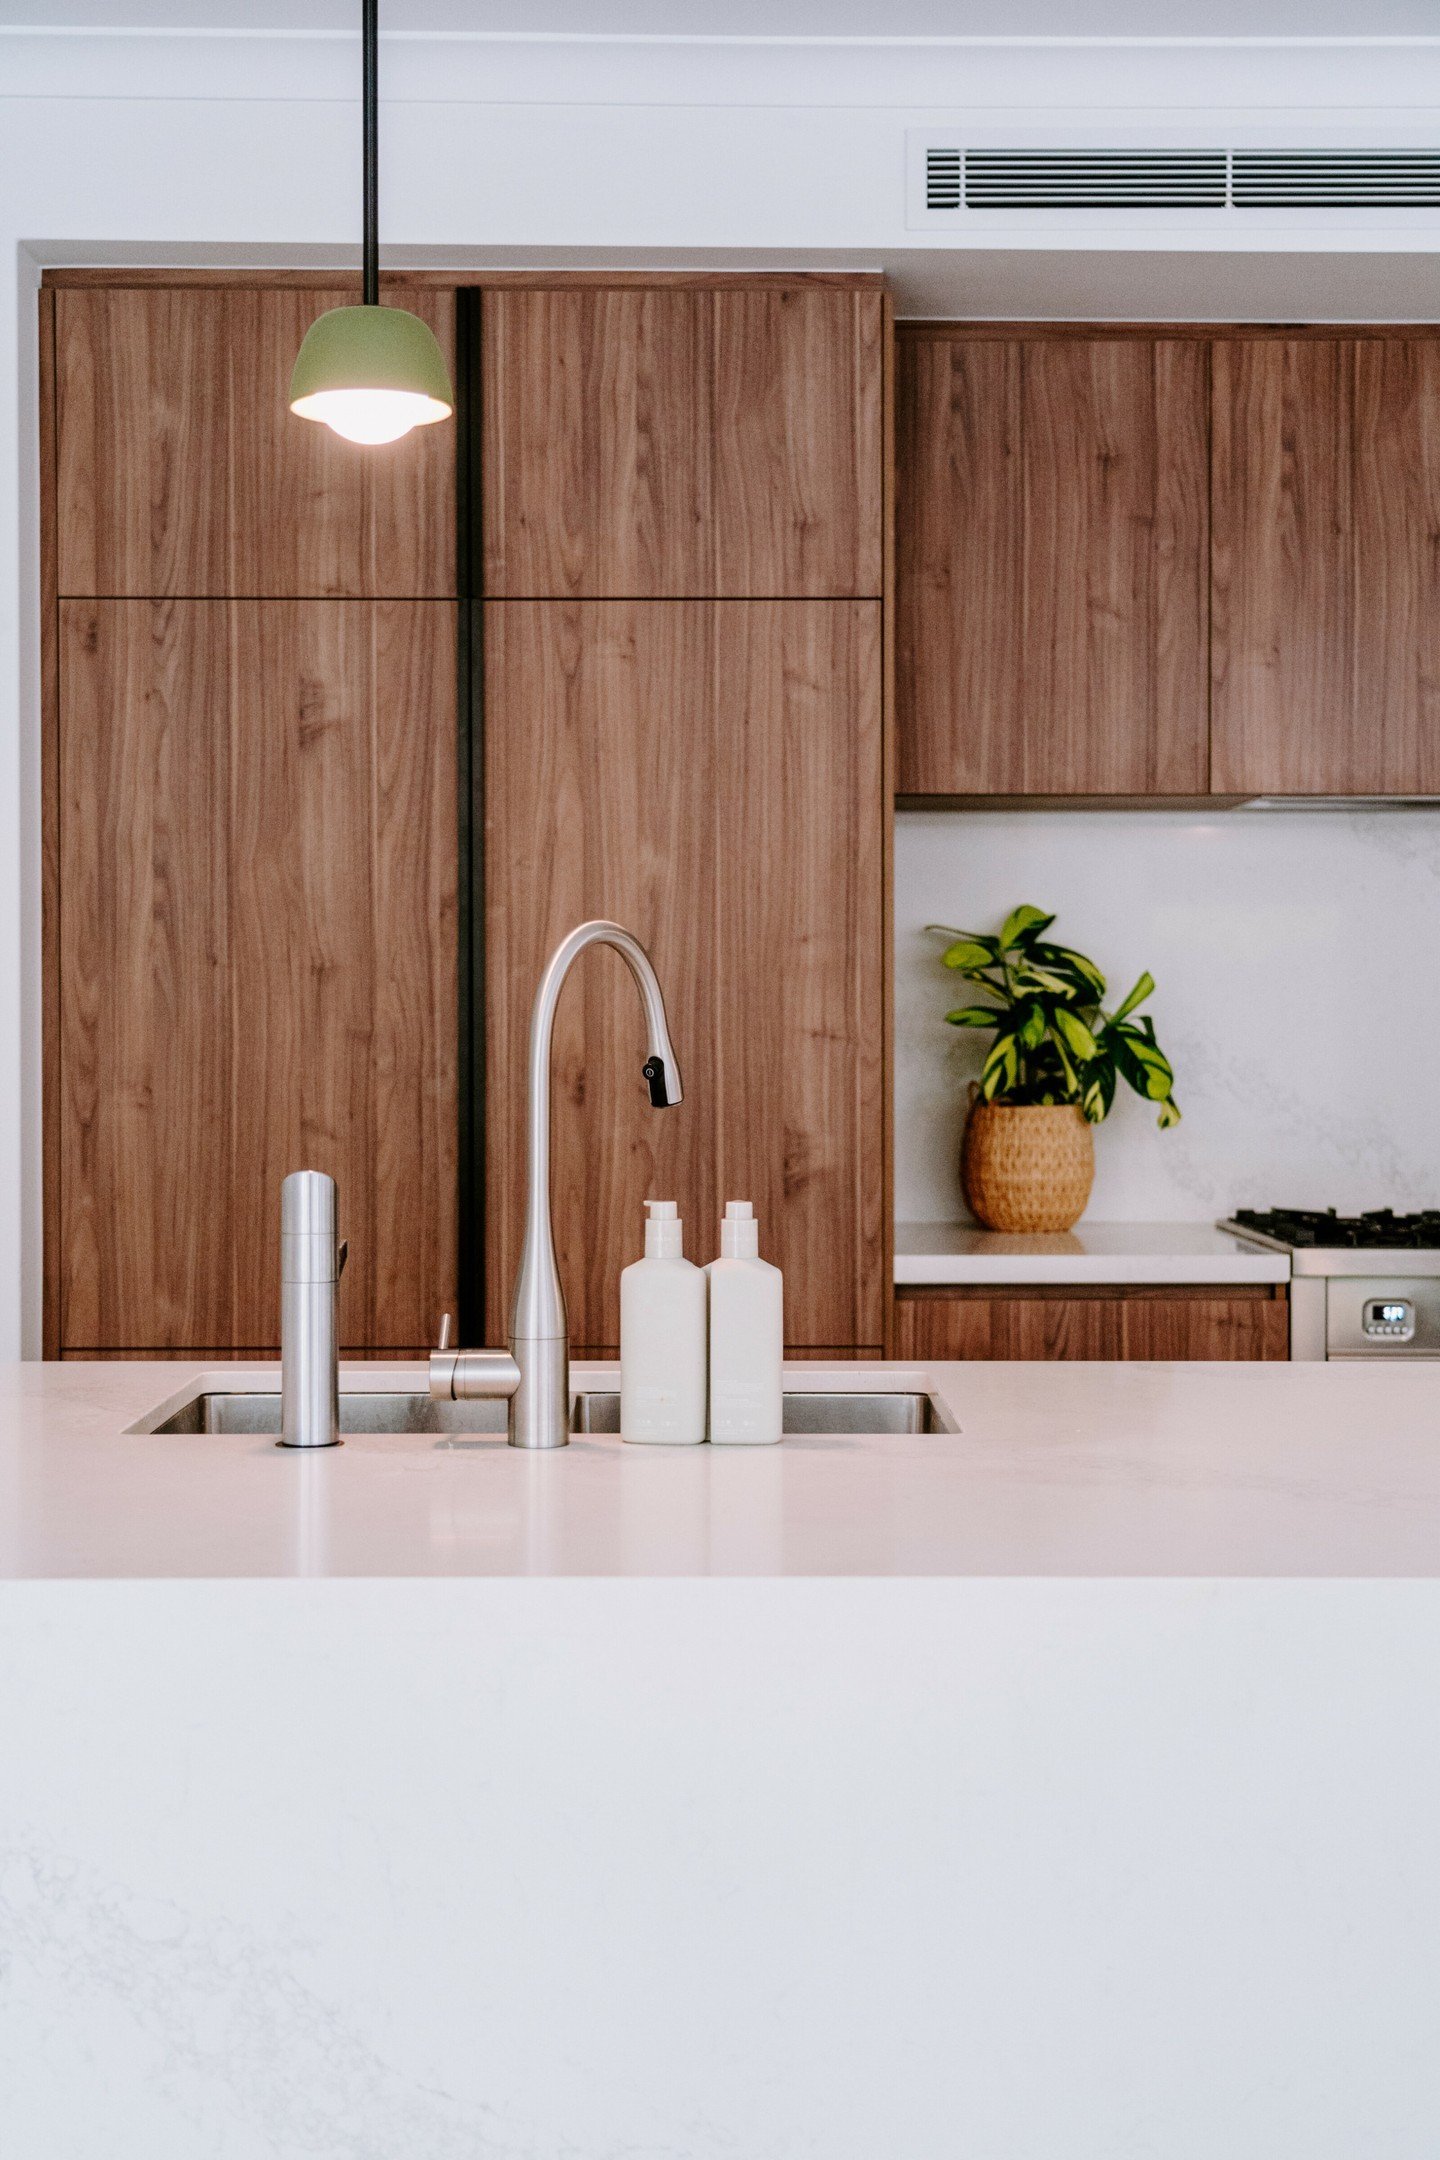 The kitchen is the heart of the home, and lighting plays a crucial role in making it a warm and welcoming space. Today, let's explore the art of kitchen lighting. From task lighting to ambient glow, discover how the right lighting can enhance both th